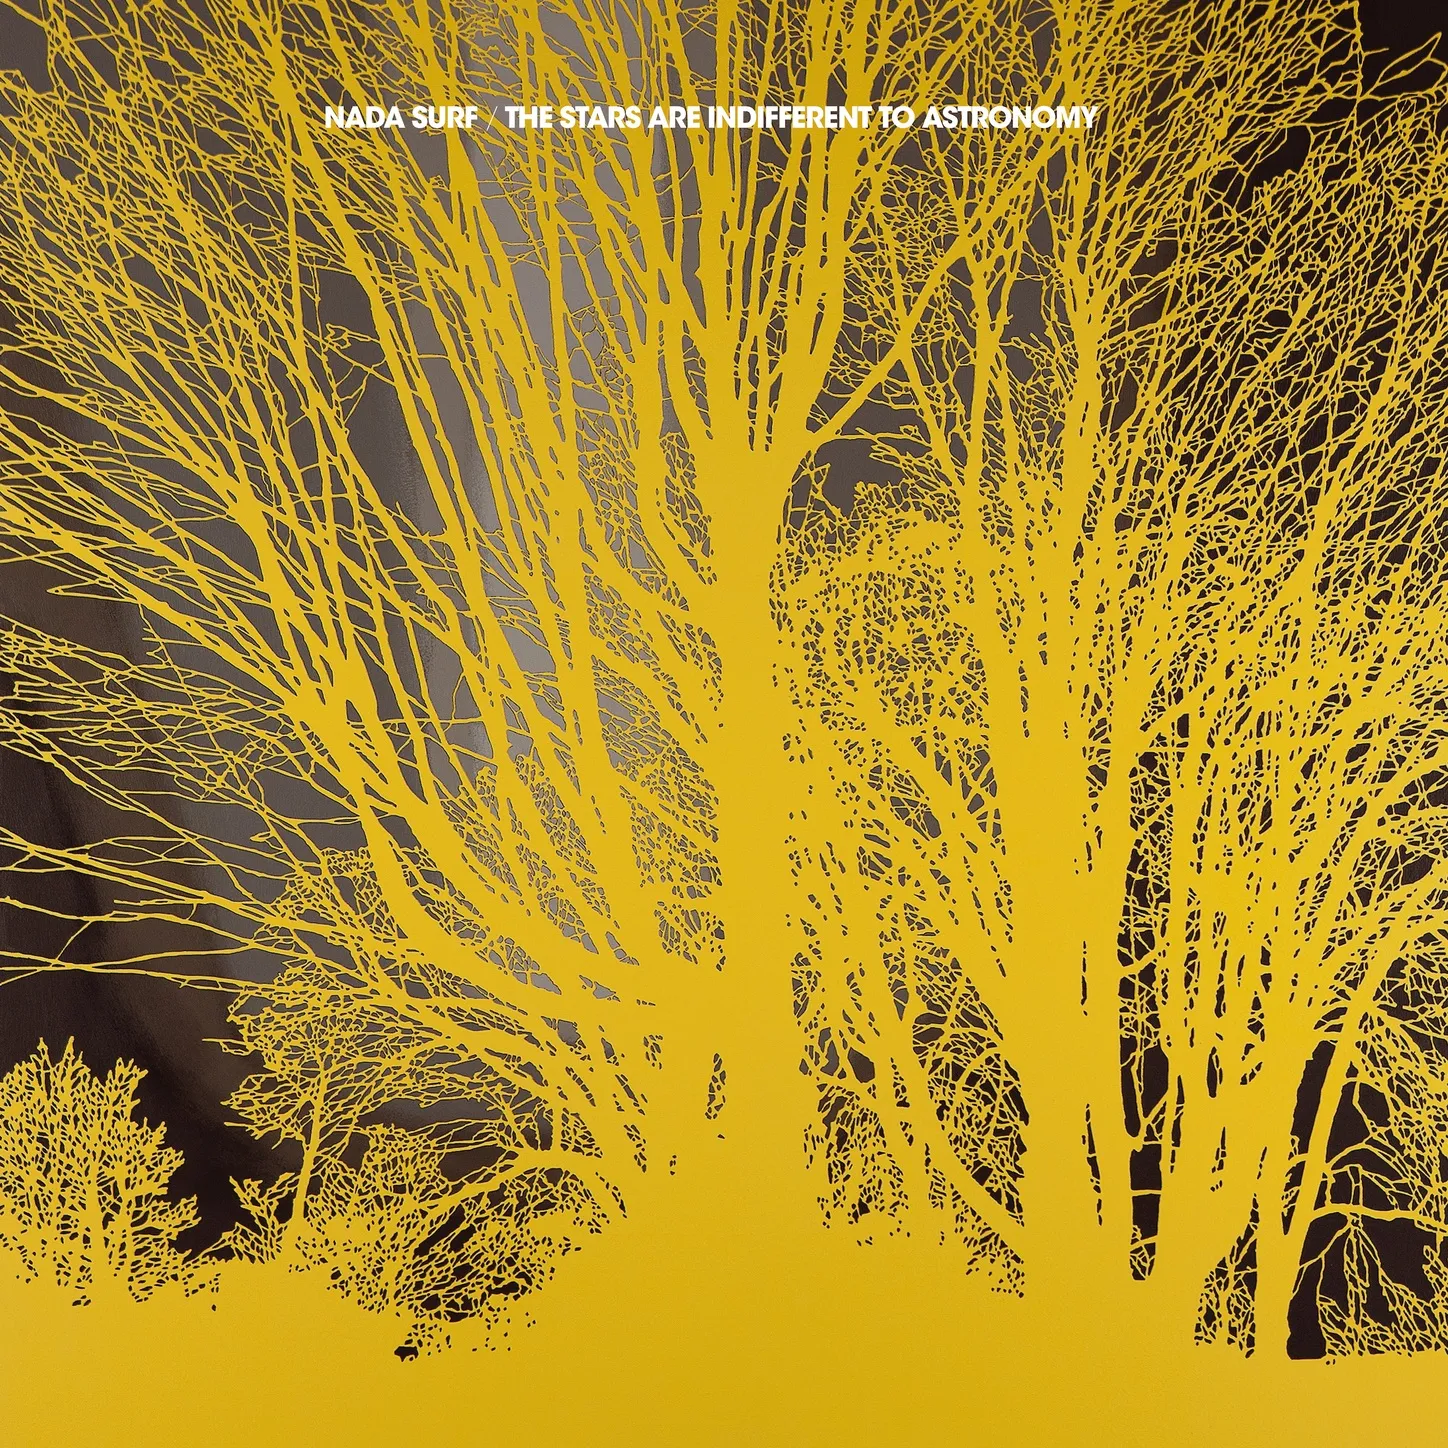 <strong>Nada Surf - The Stars Are Indifferent To Astronomy</strong> (Vinyl LP - black)